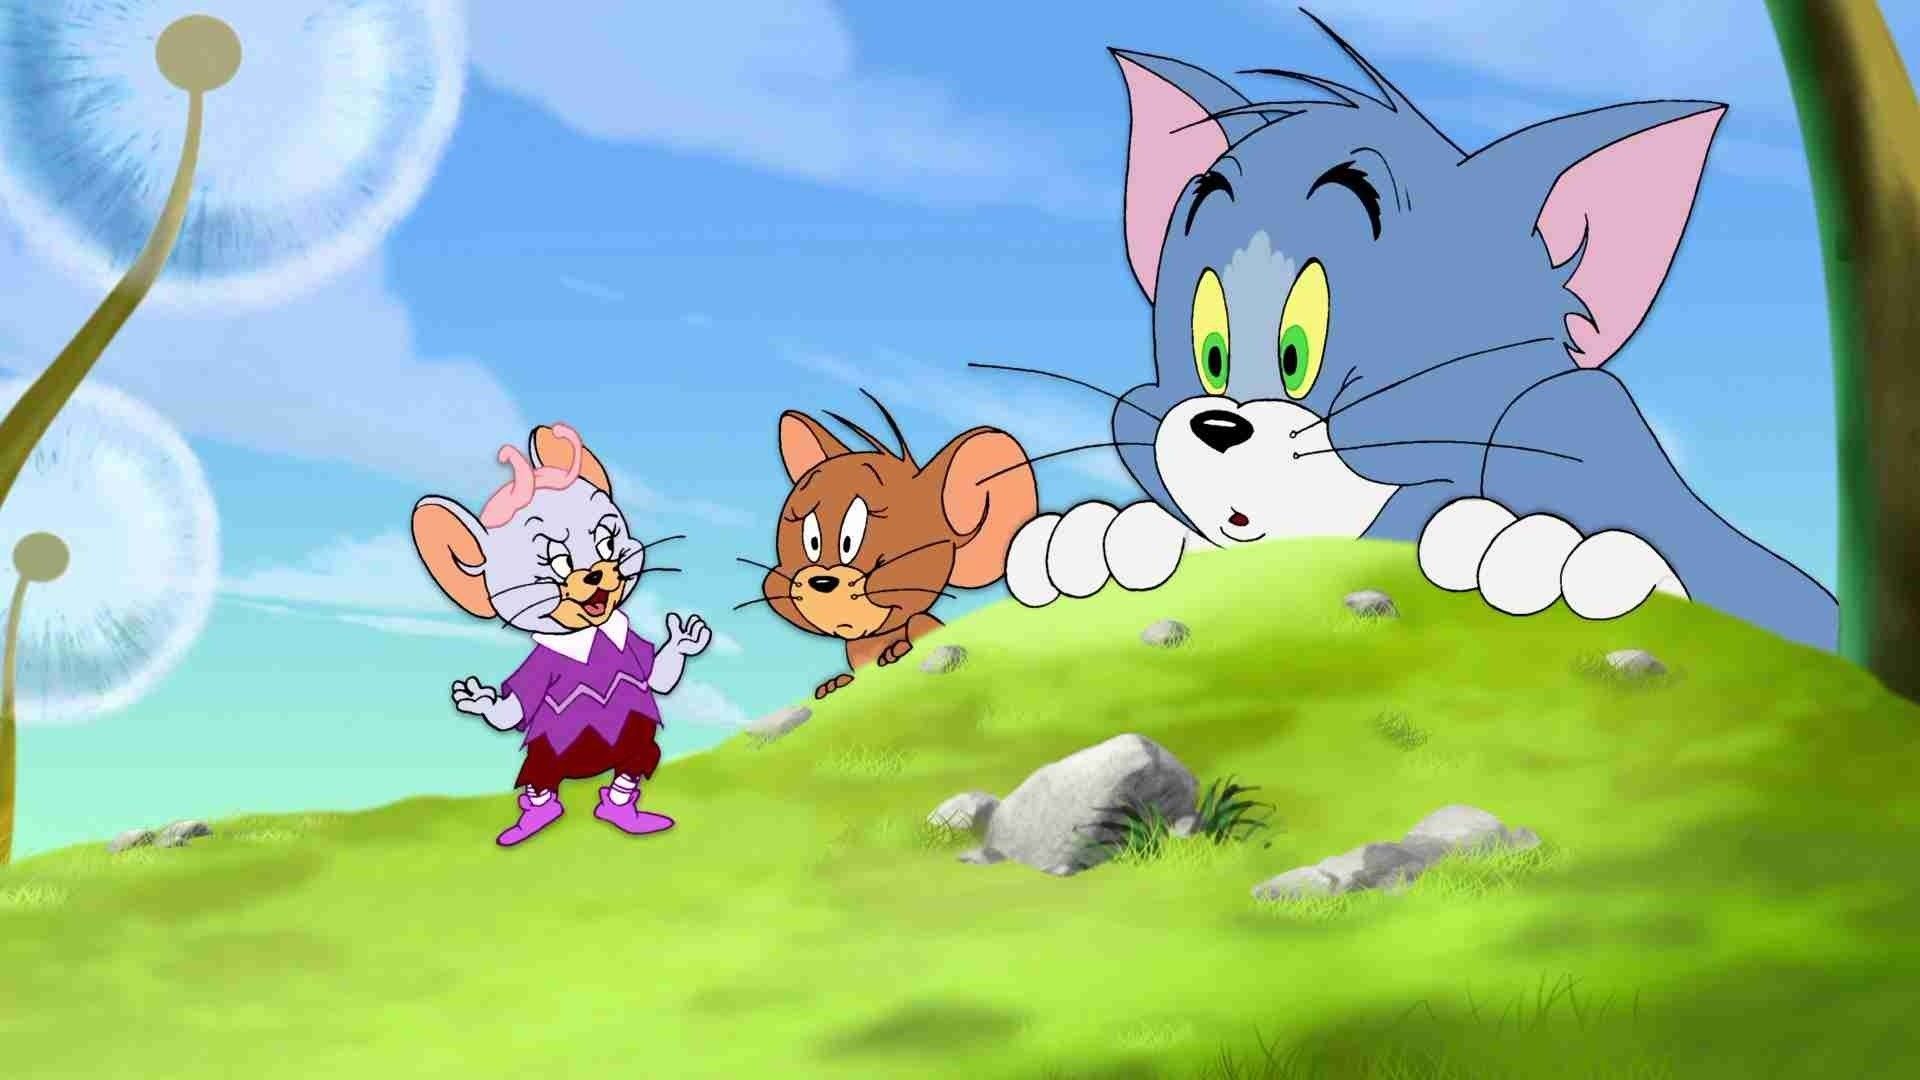 Love Wallpaper Tom And Jerry Image